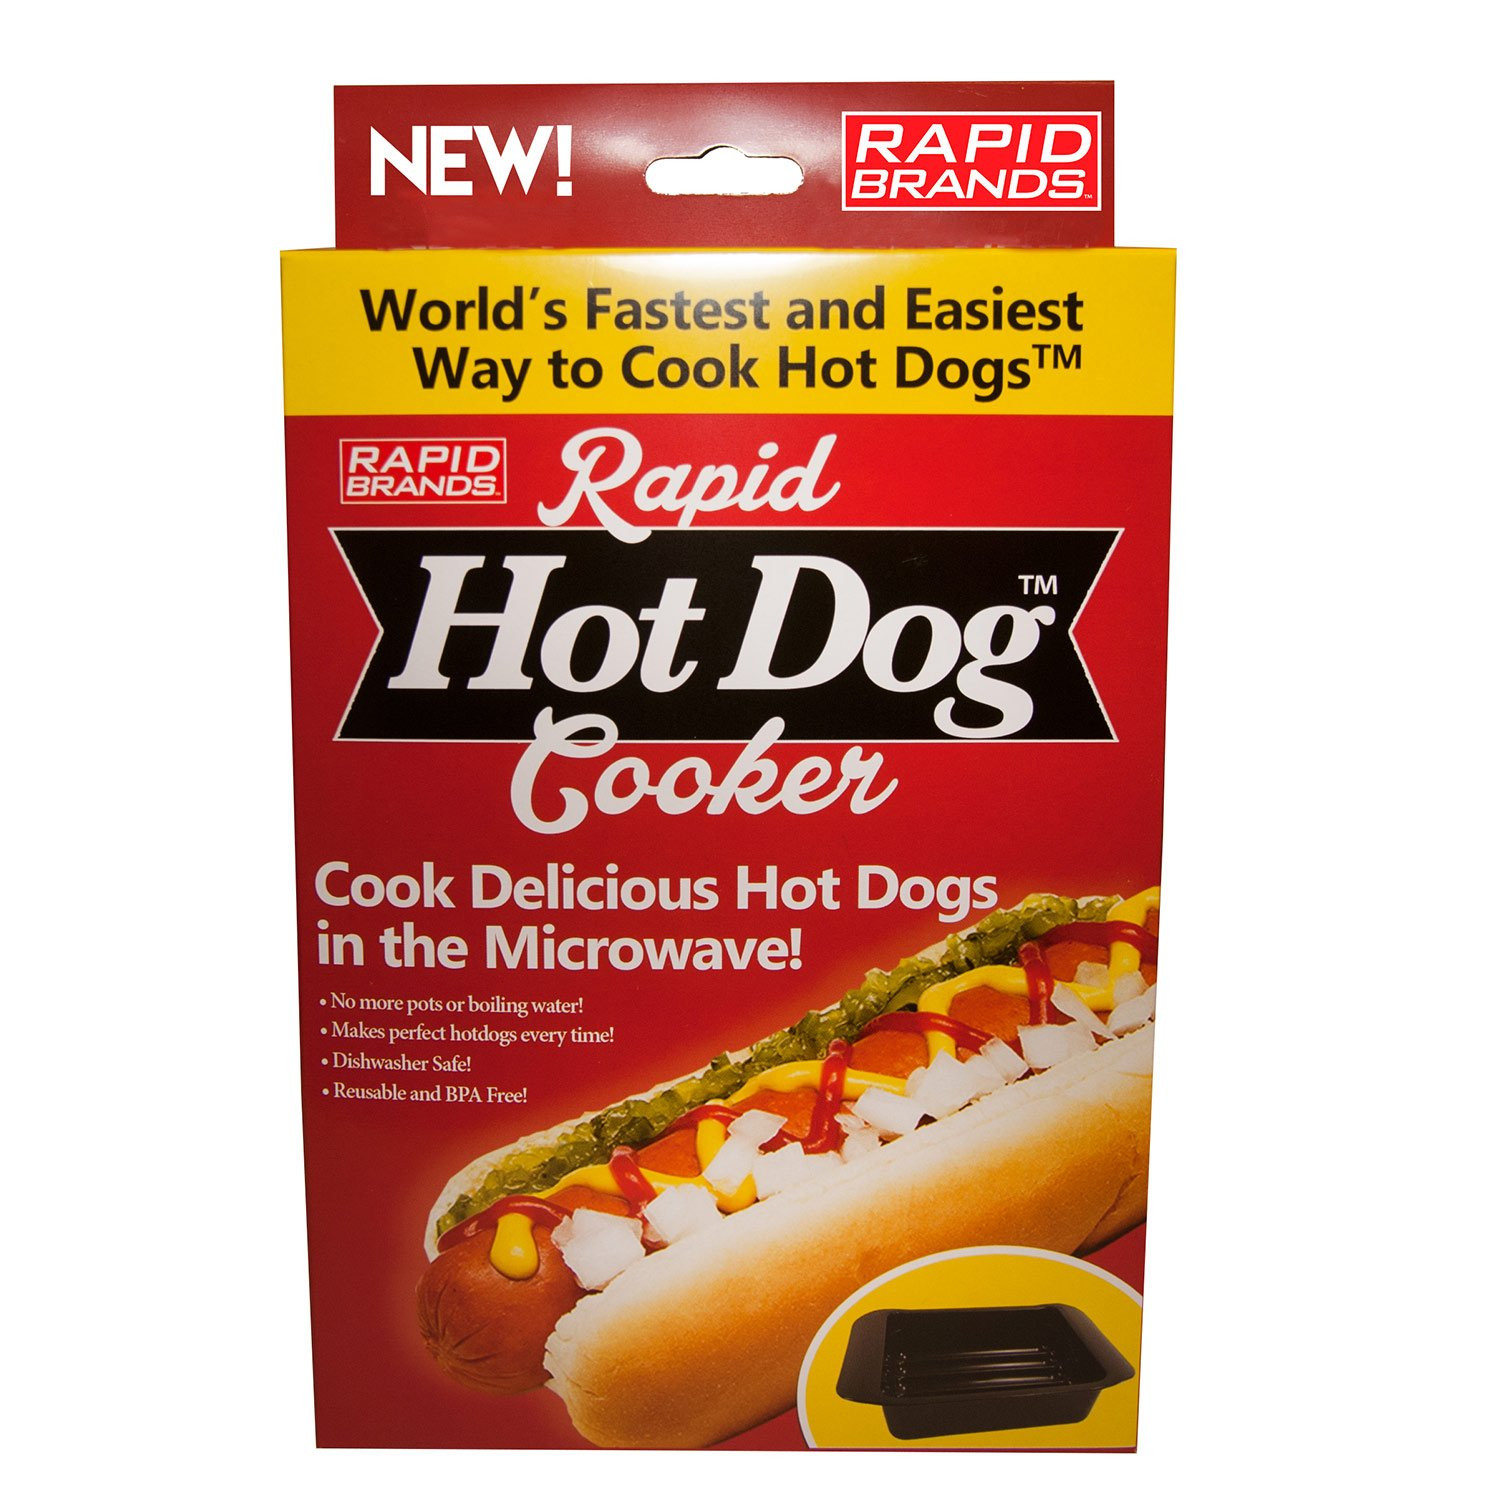 Hot Dogs Microwave
 Hot Dog Perfect Quick Heat and Eat 2 minutes Kitchen